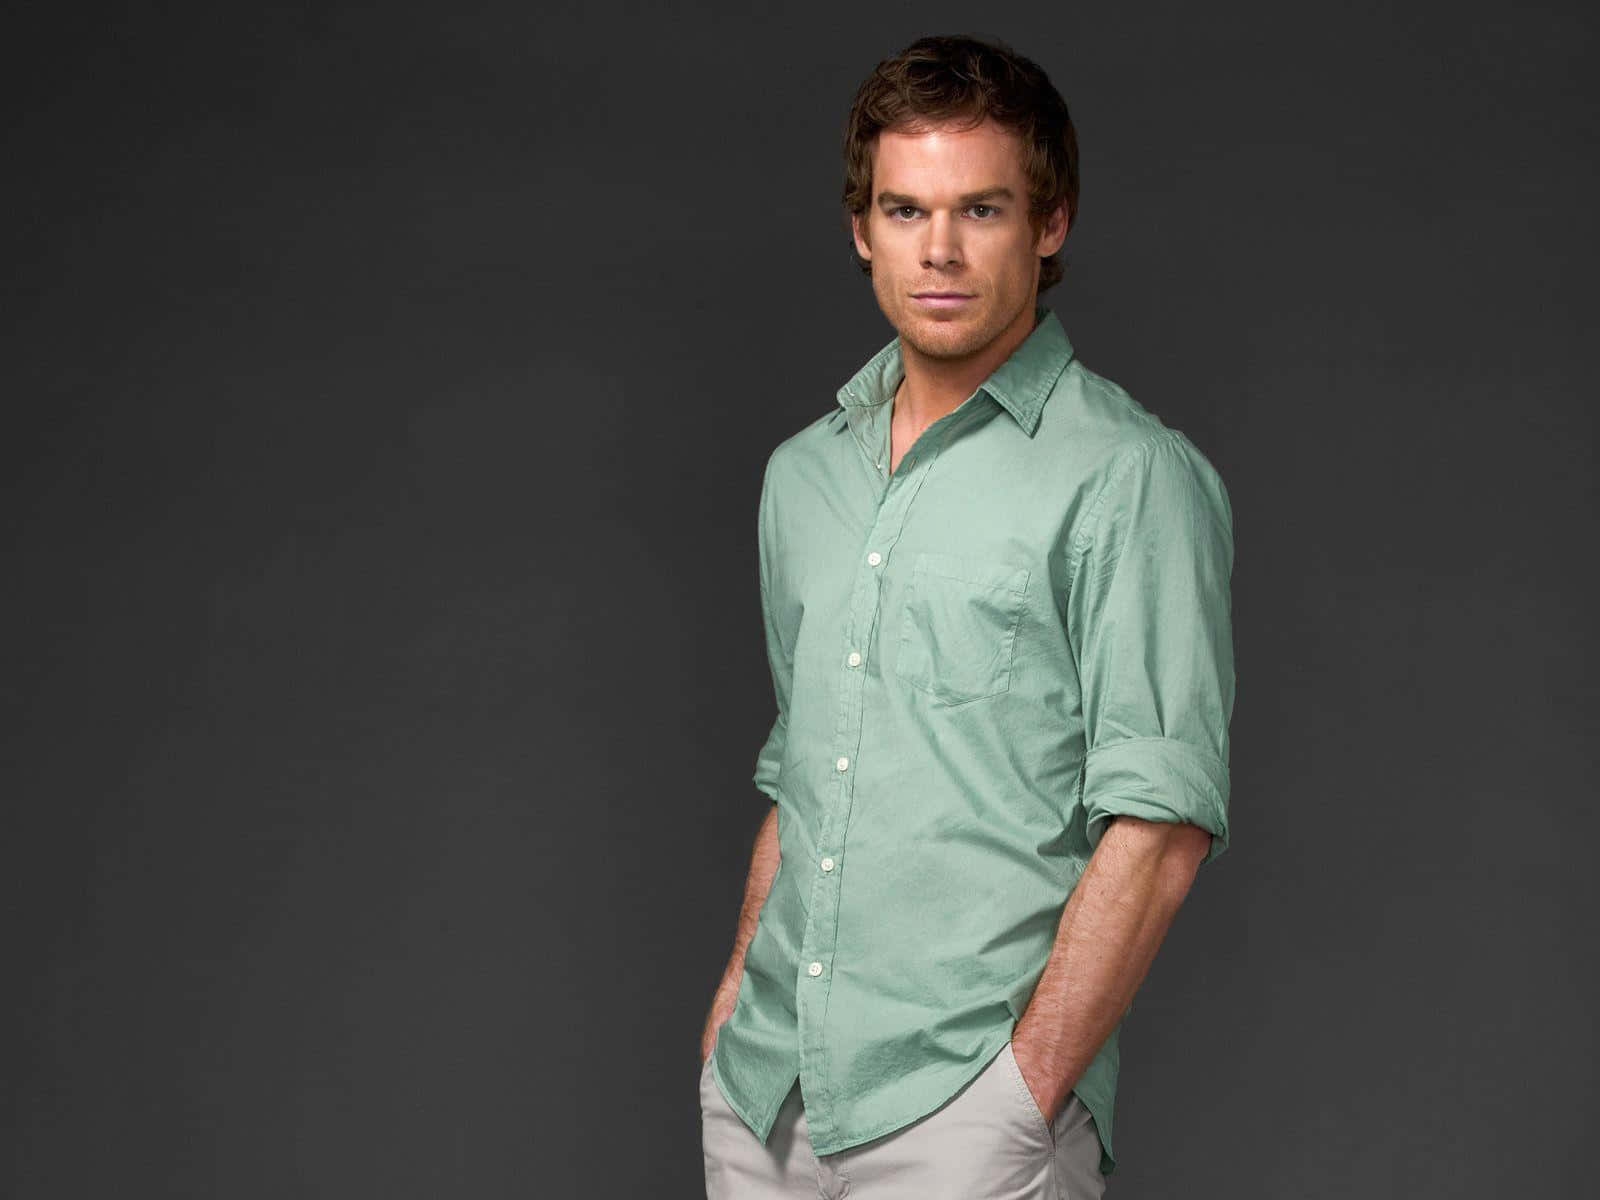 Actor Michael C. Hall poses in a bowtie. Wallpaper